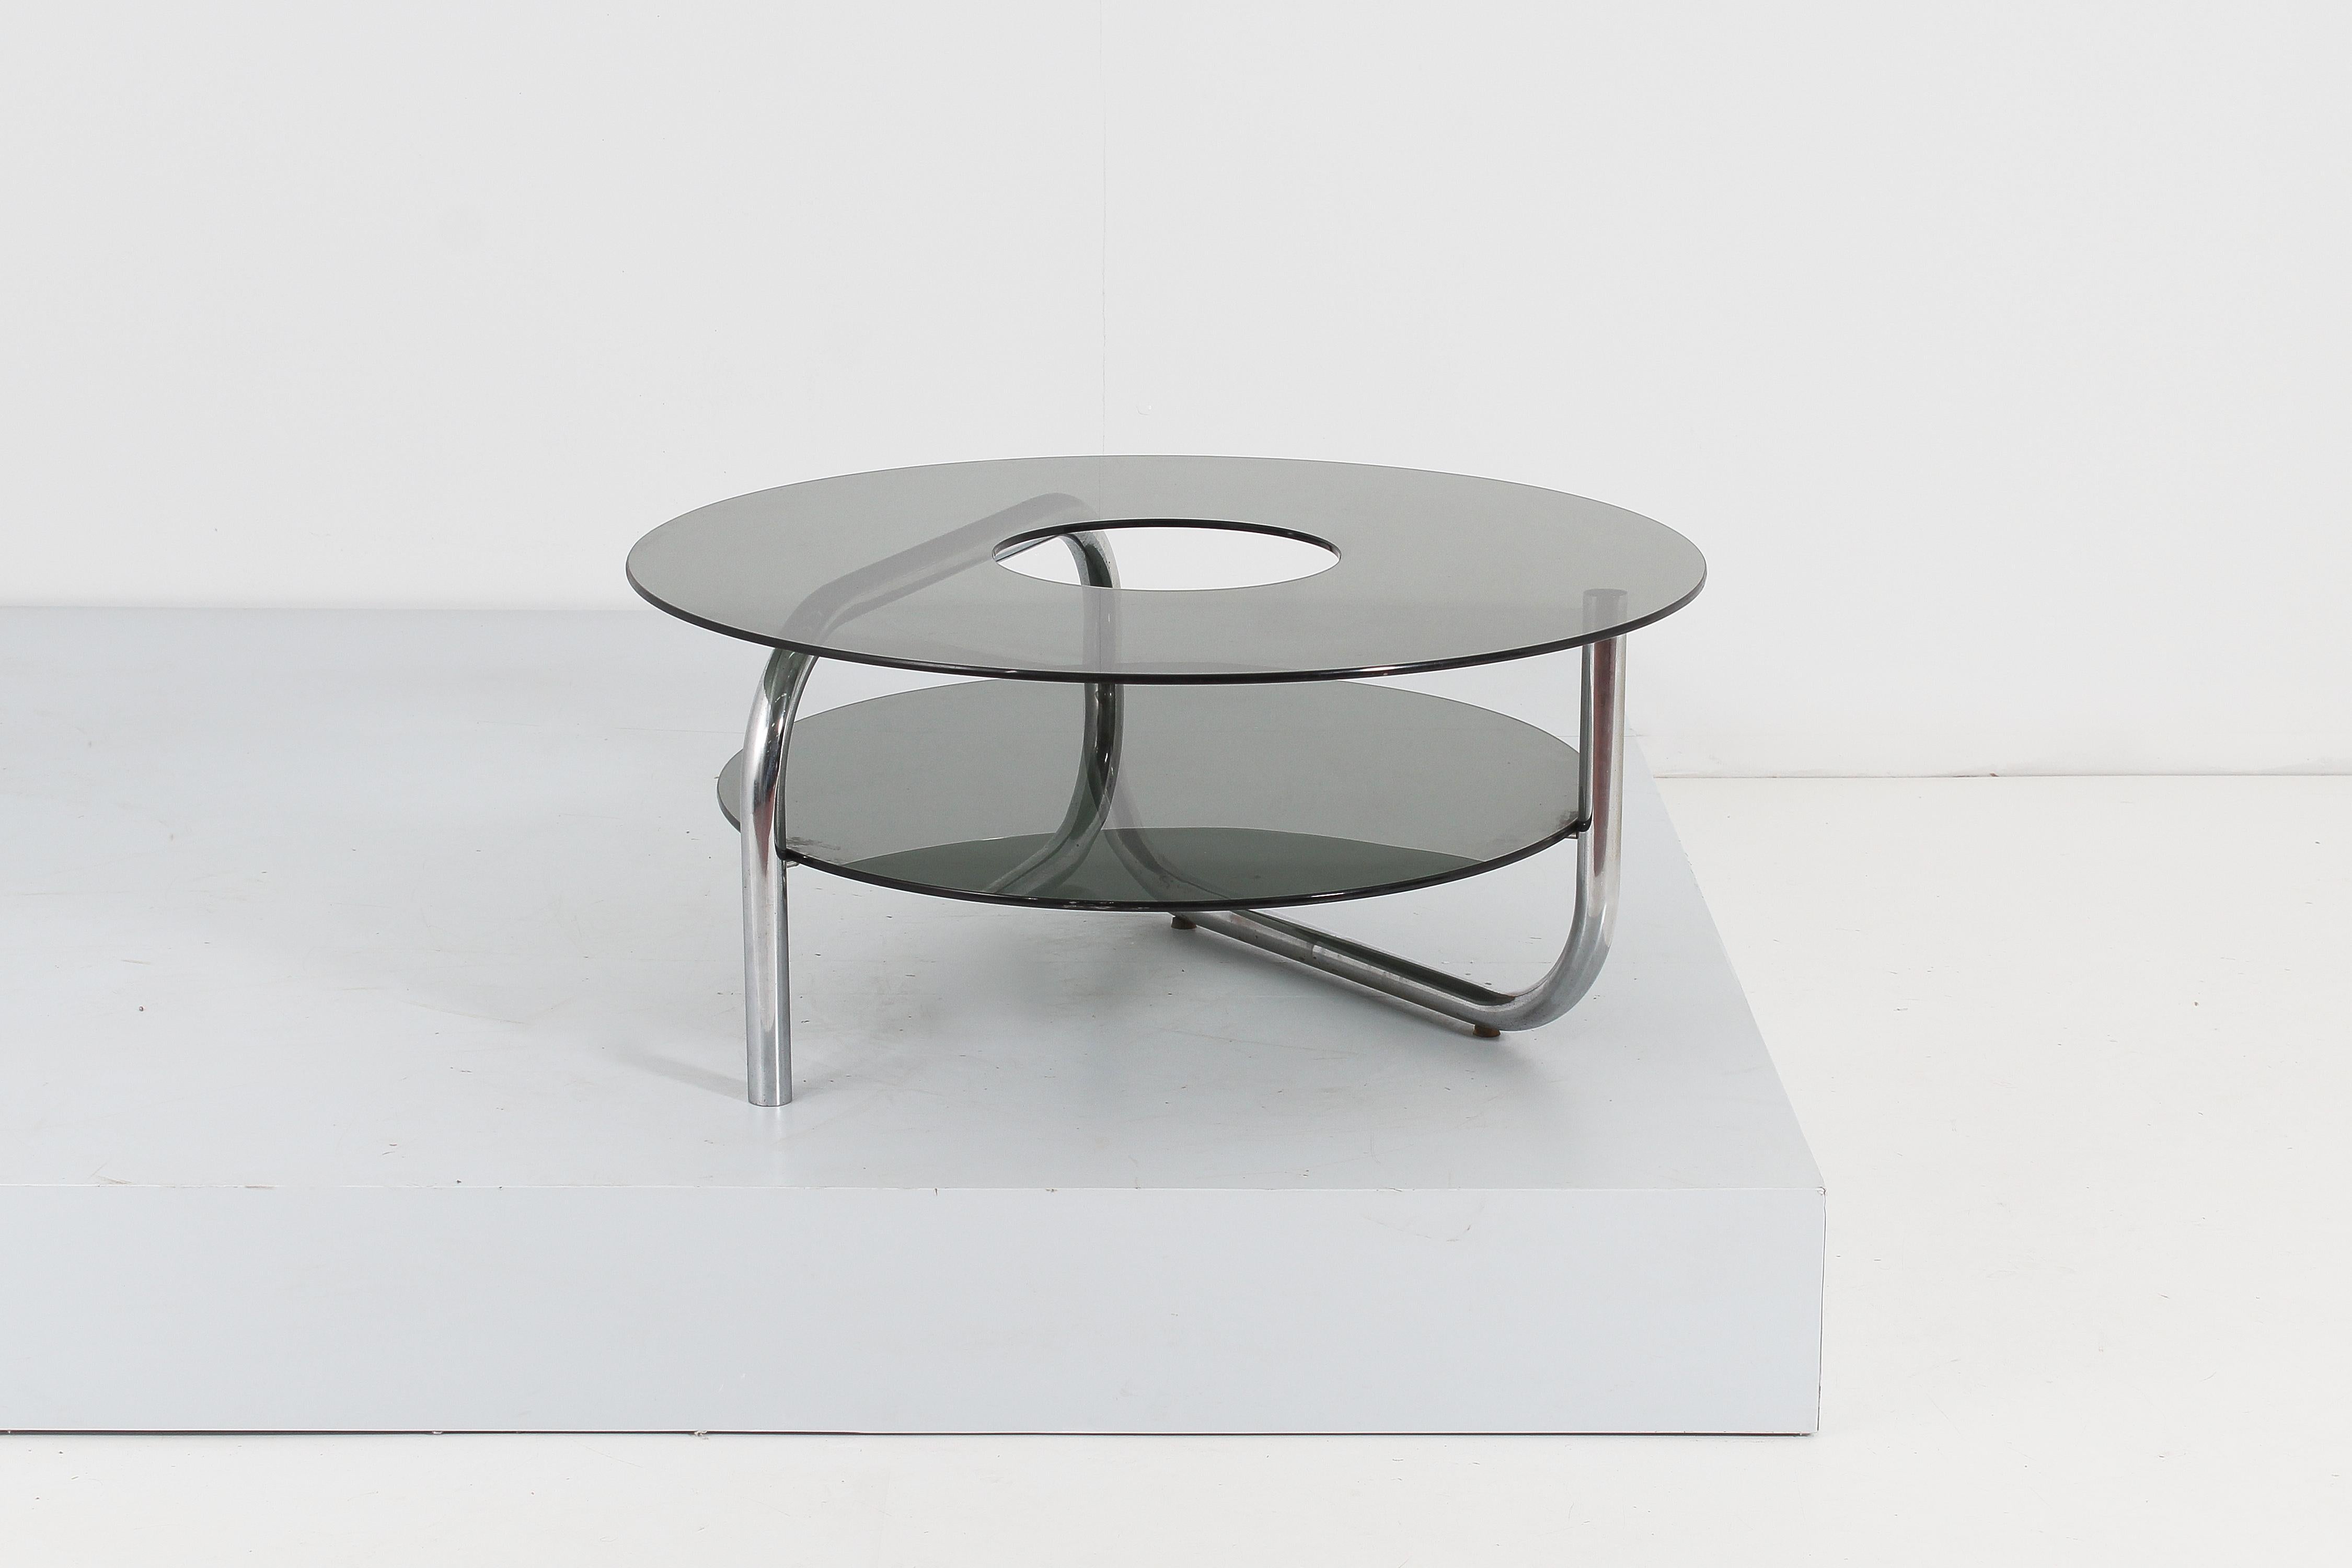 Stylish circular coffee table with double top in smoked glass with curved tubular support in chromed steel. The upper shelf, with a larger diameter than the lower one, has a circular hole in the center, to allow you to place bottles of liquor or